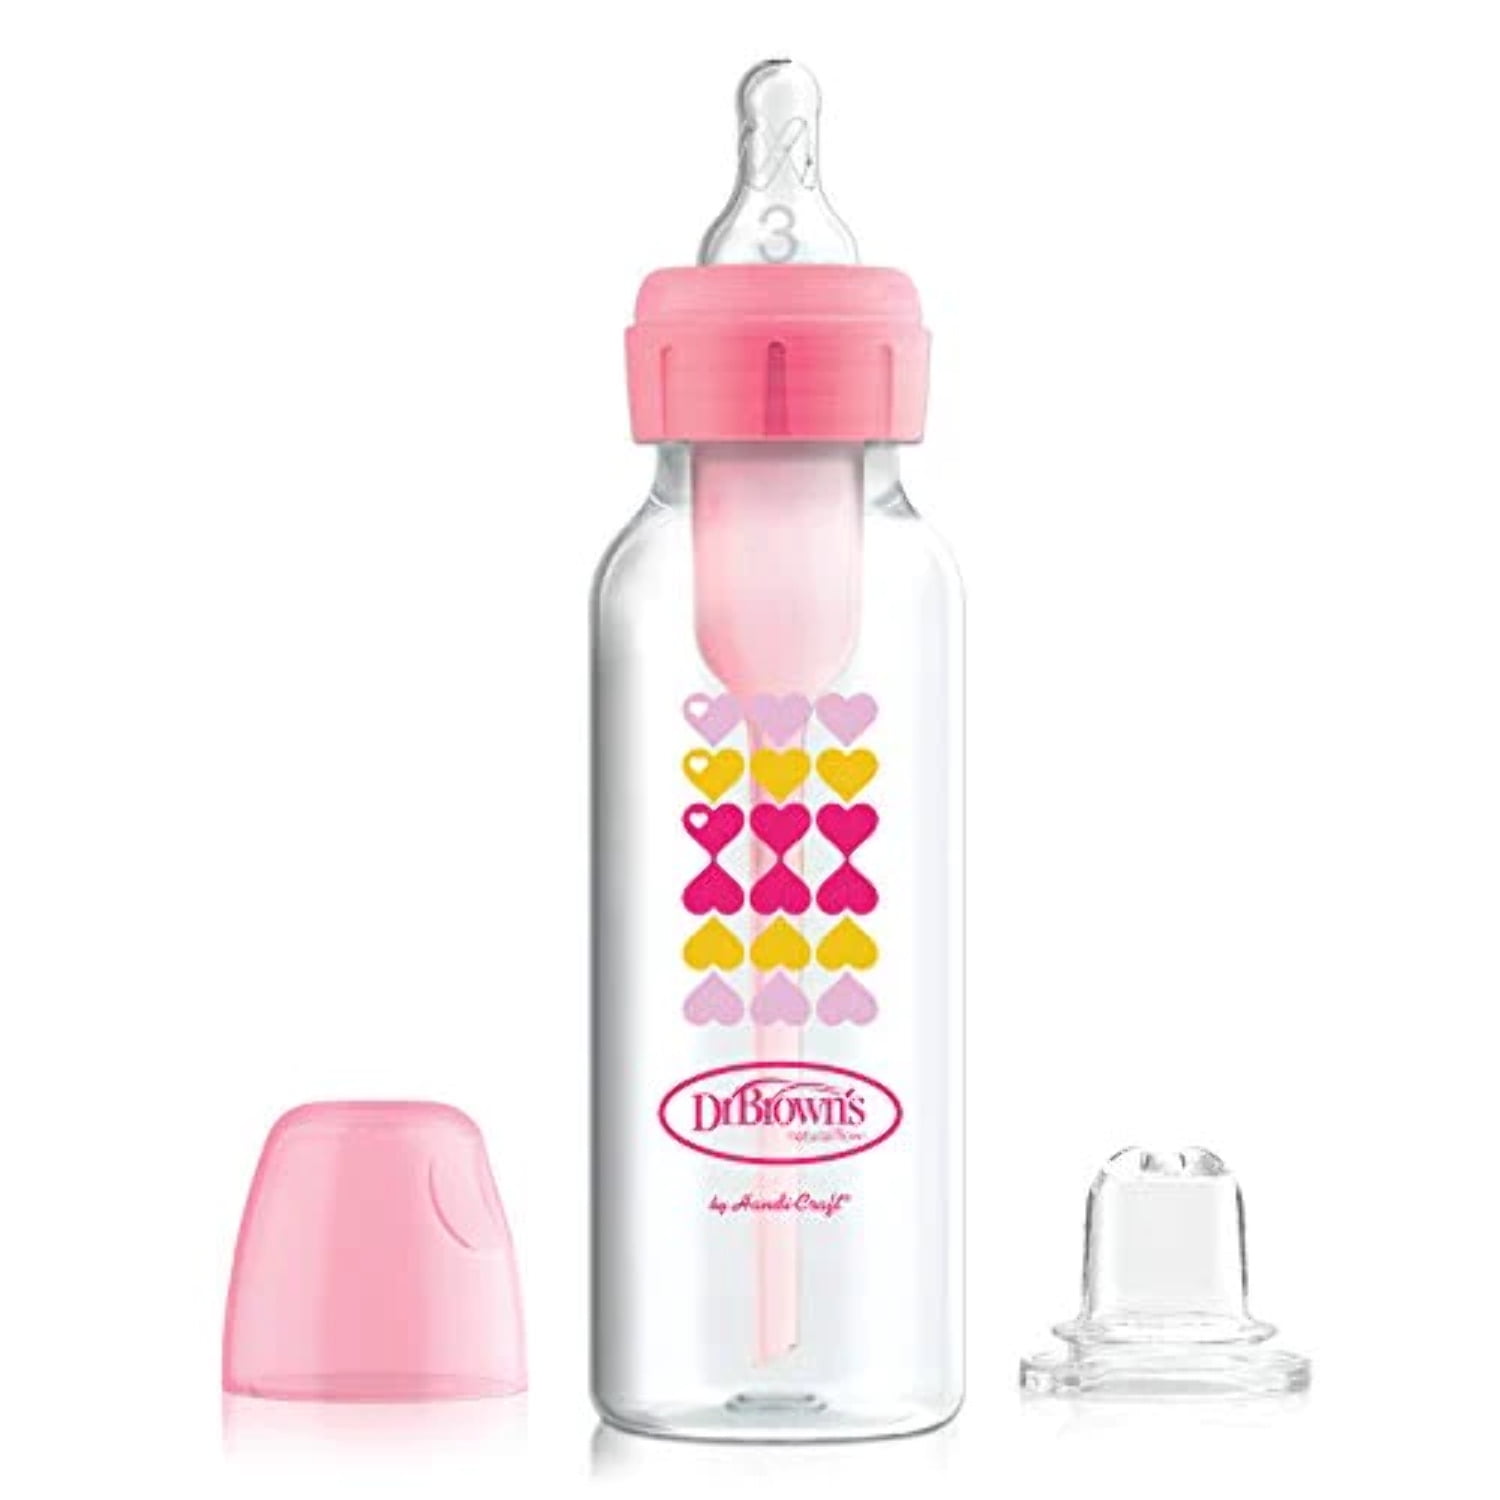 Tupperware baby bottles come in two sizes with a few handy accessories.